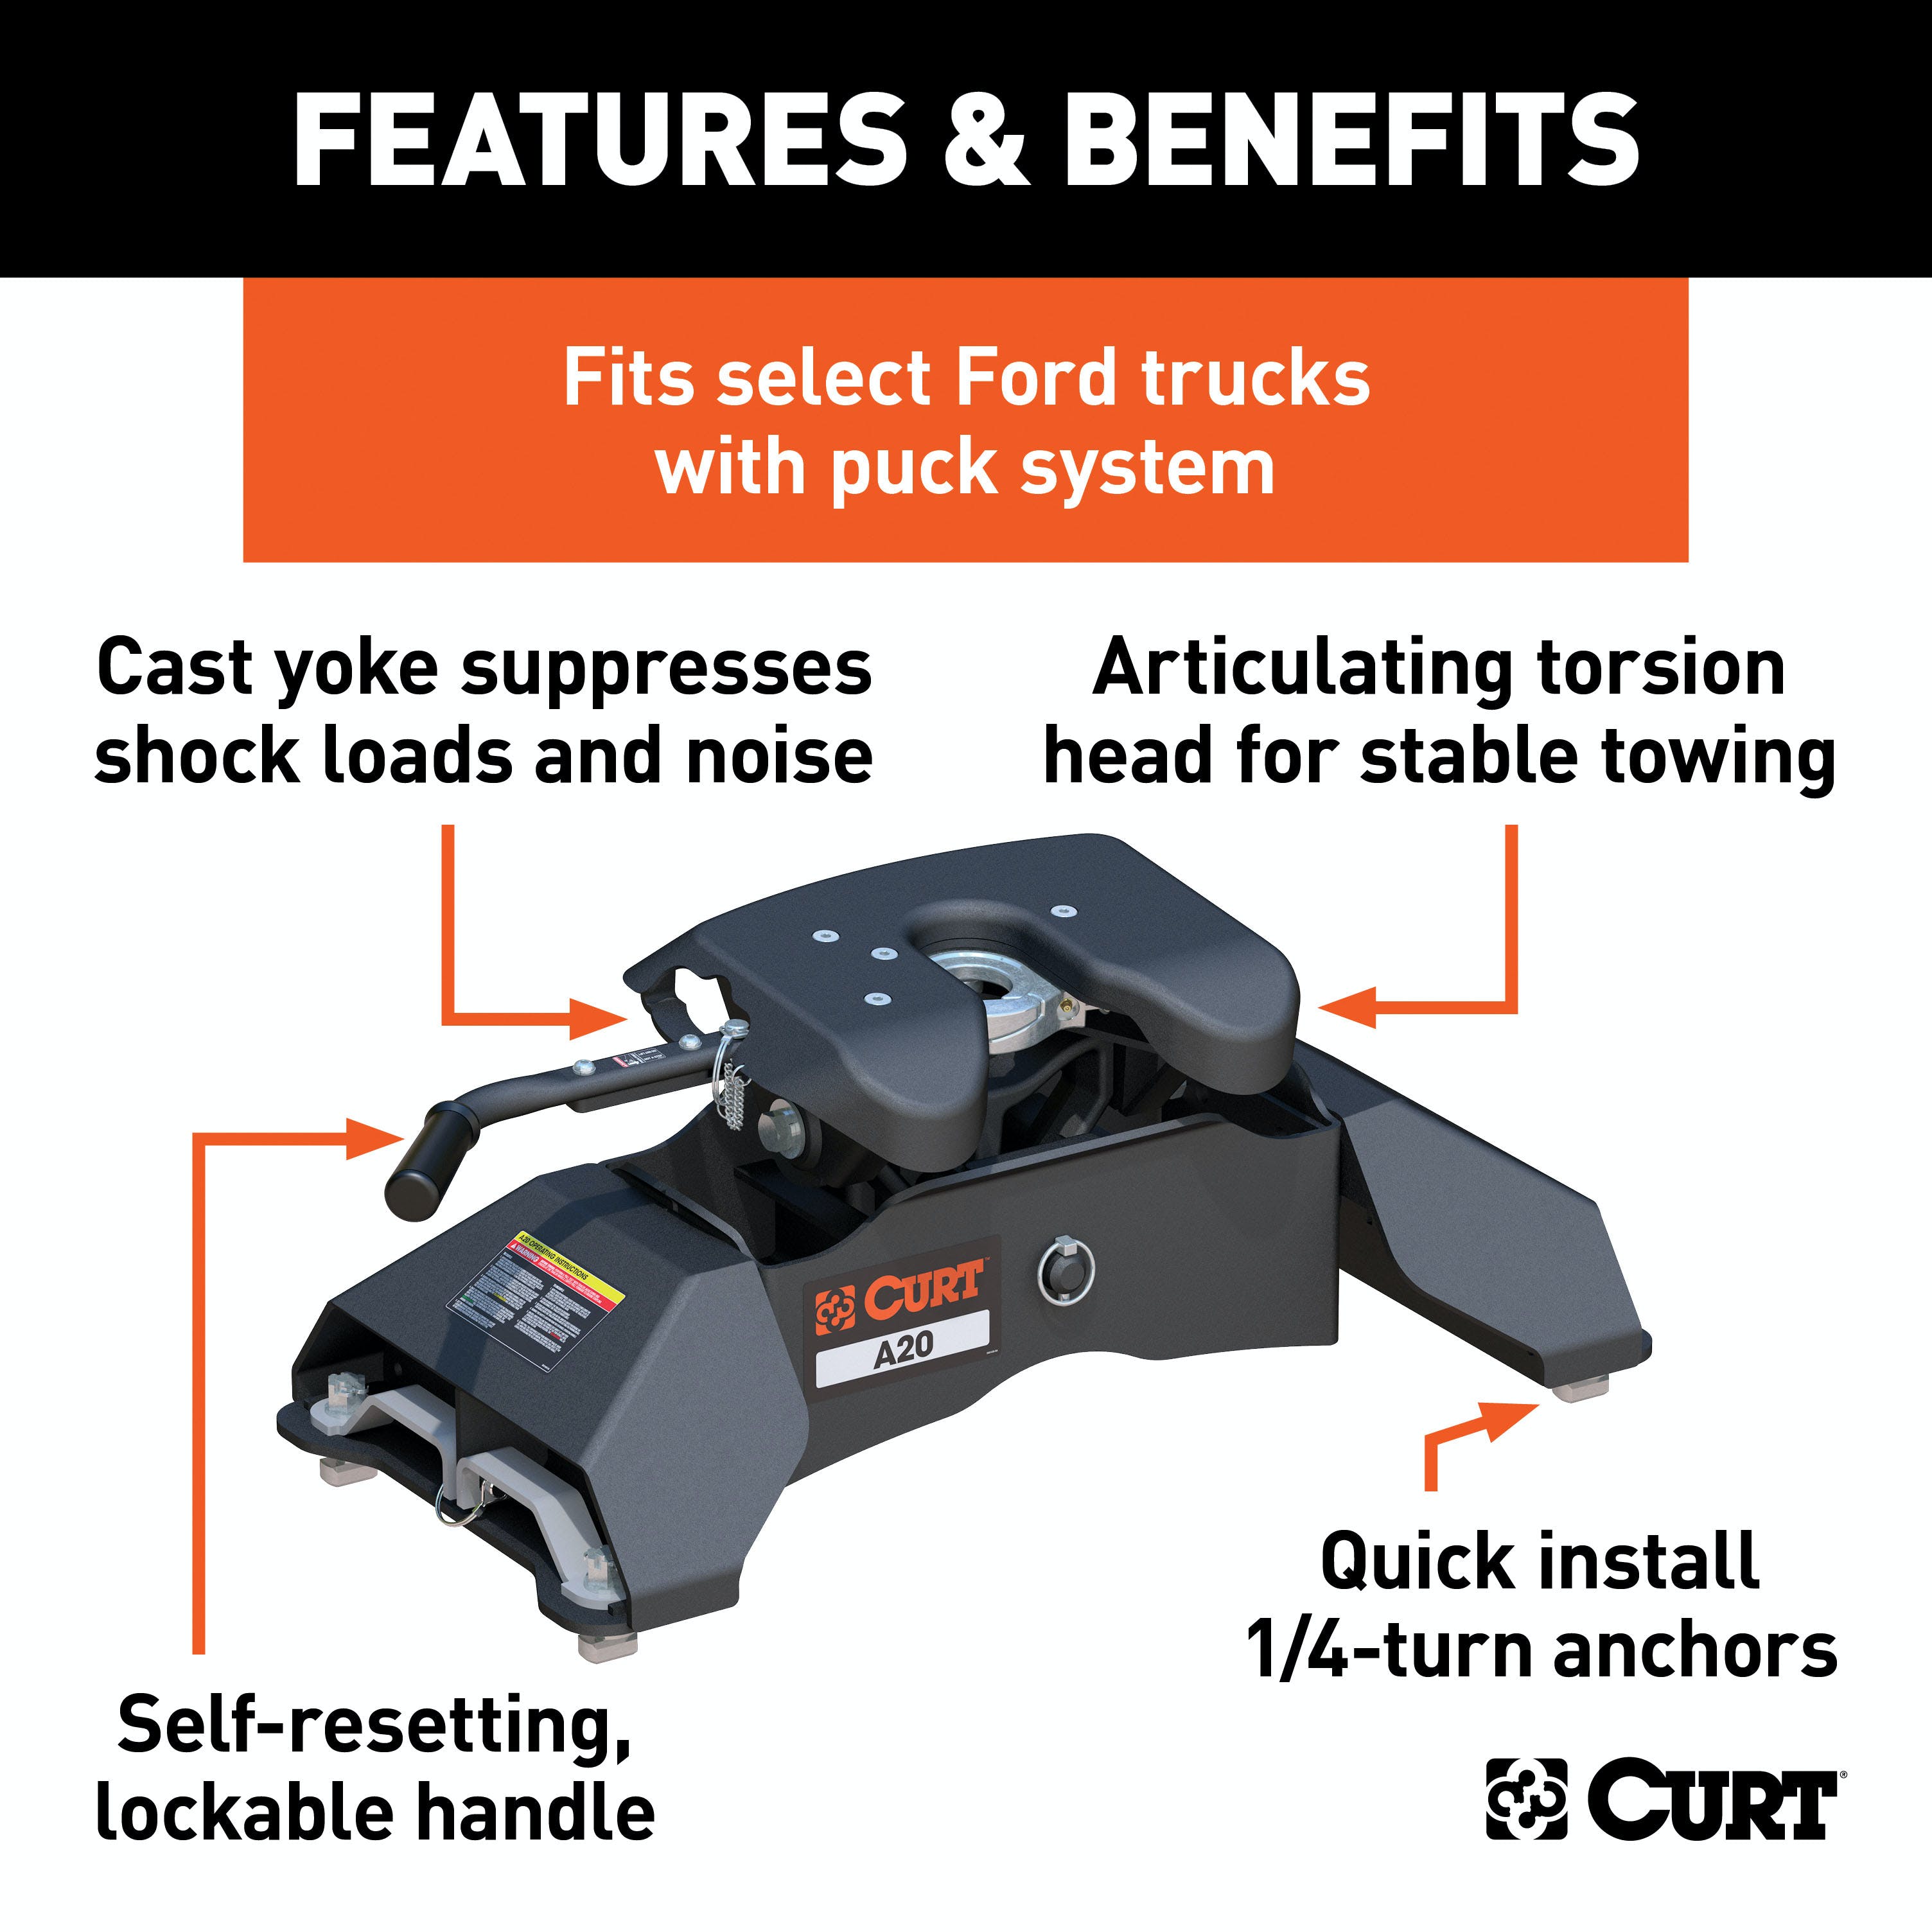 CURT 16034 A20 5th Wheel Hitch, Select Ford F-250, F-350, F-450, 8' Bed Puck System